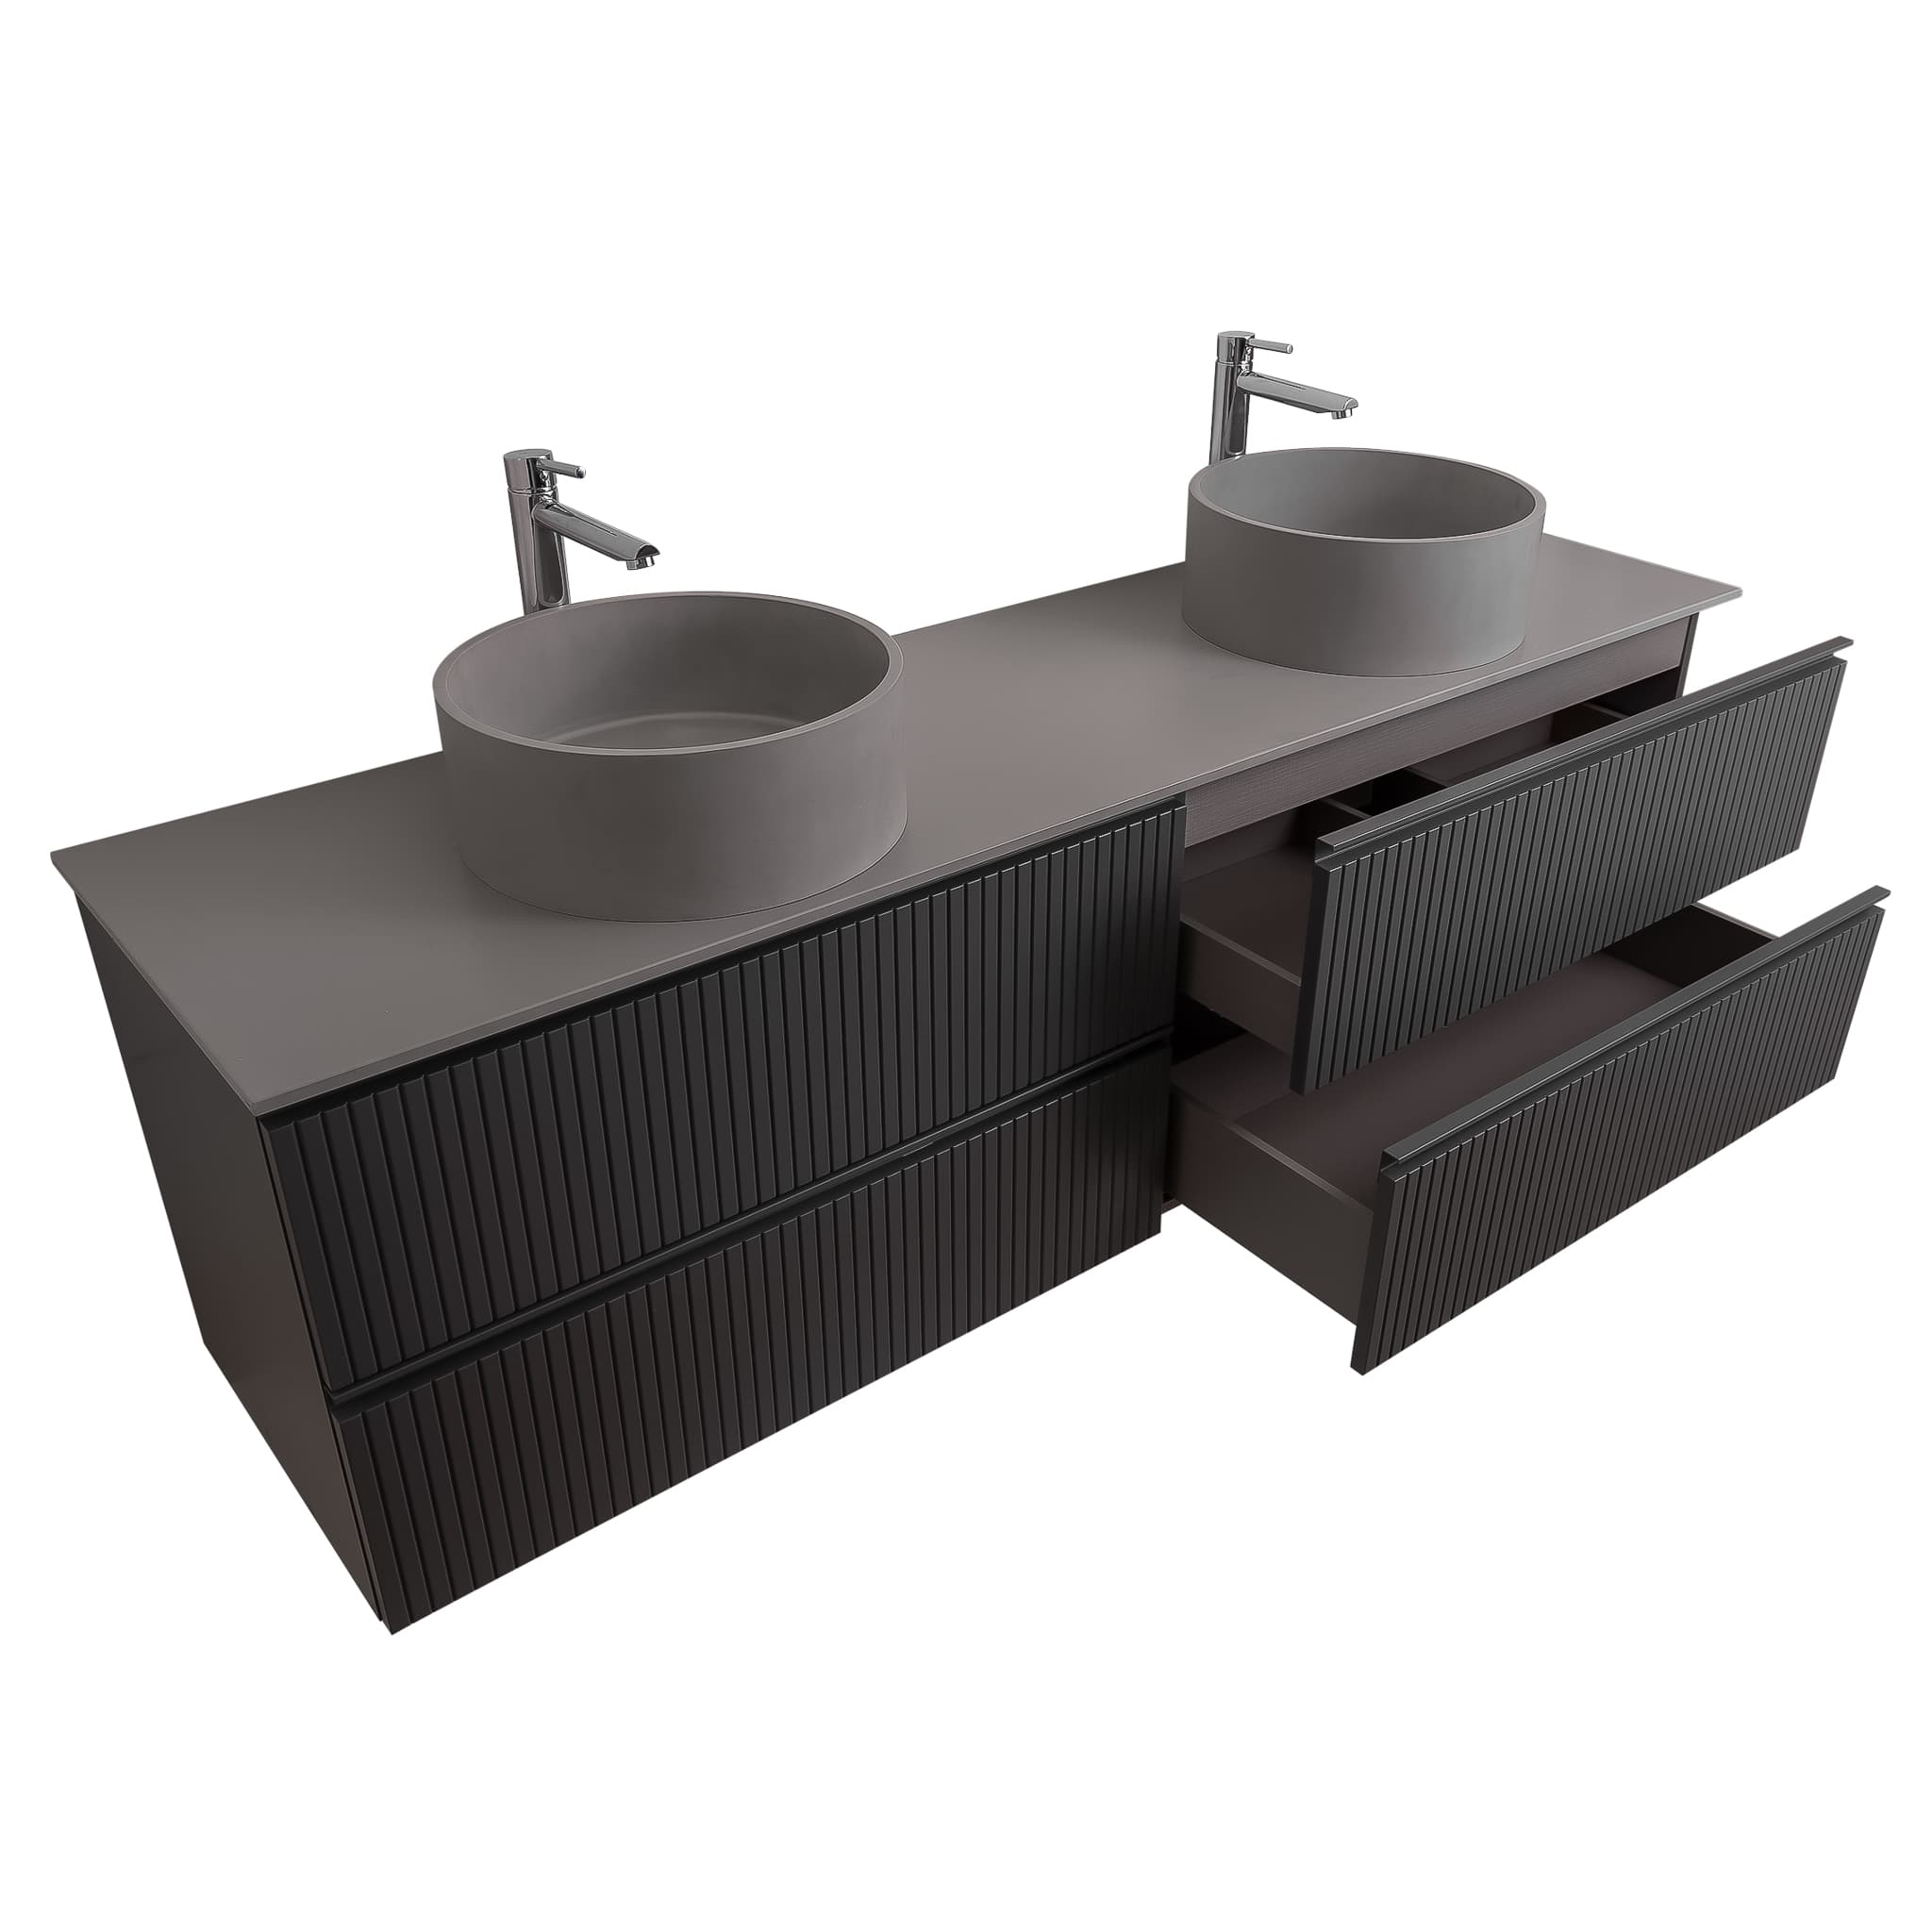 Ares 72 Matte Grey Cabinet, Solid Surface Flat Grey Counter And Two Round Solid Surface Grey Basin 1386, Wall Mounted Modern Vanity Set